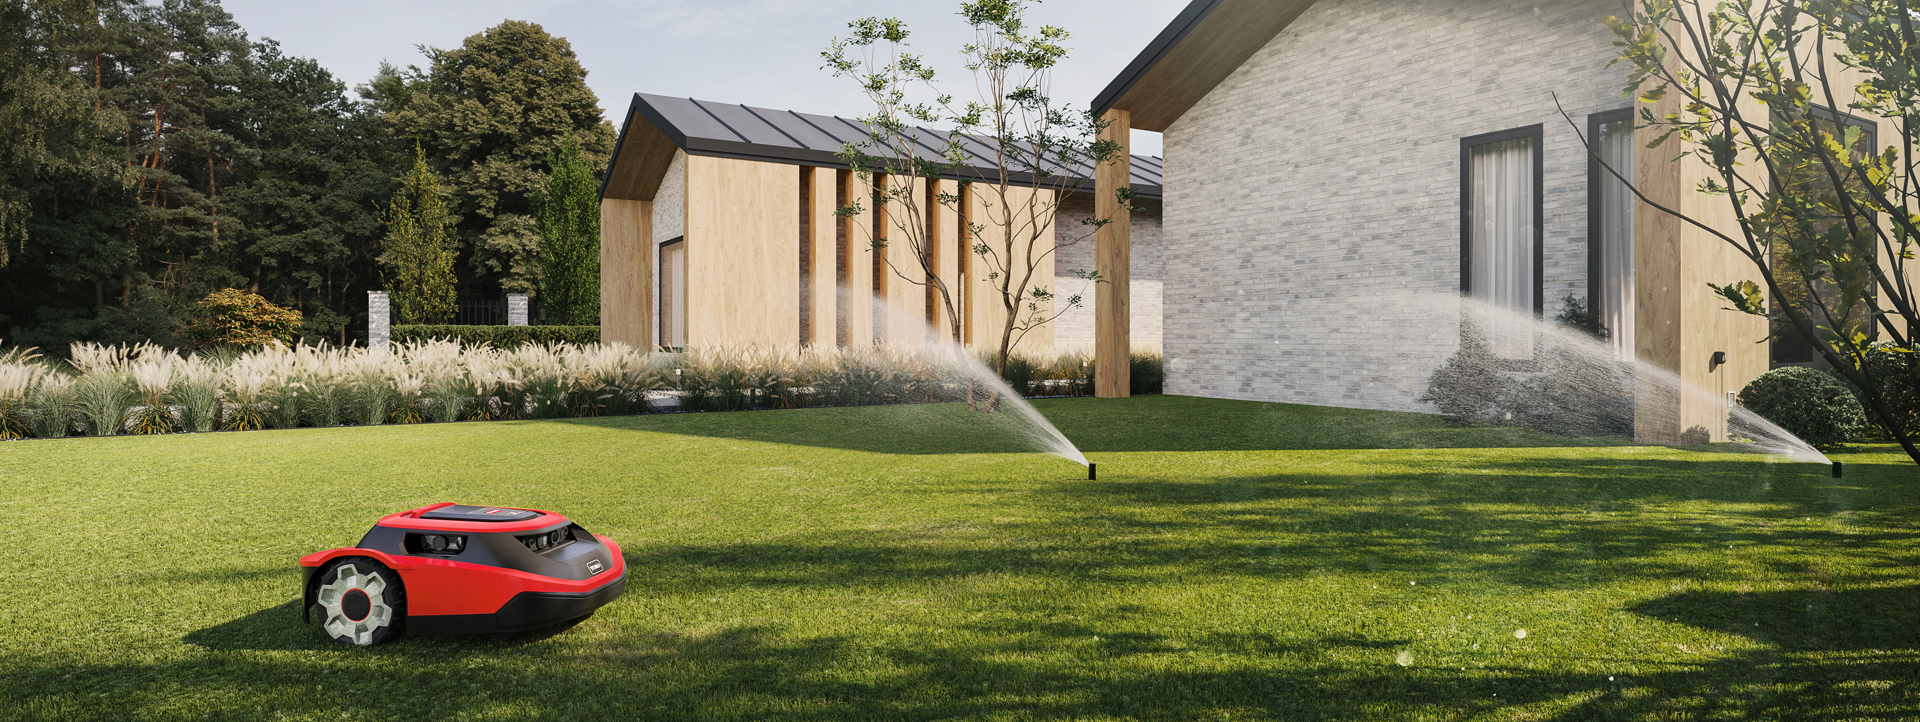 Image of robotic lawnmower and irrigation sprinklers in front of a house